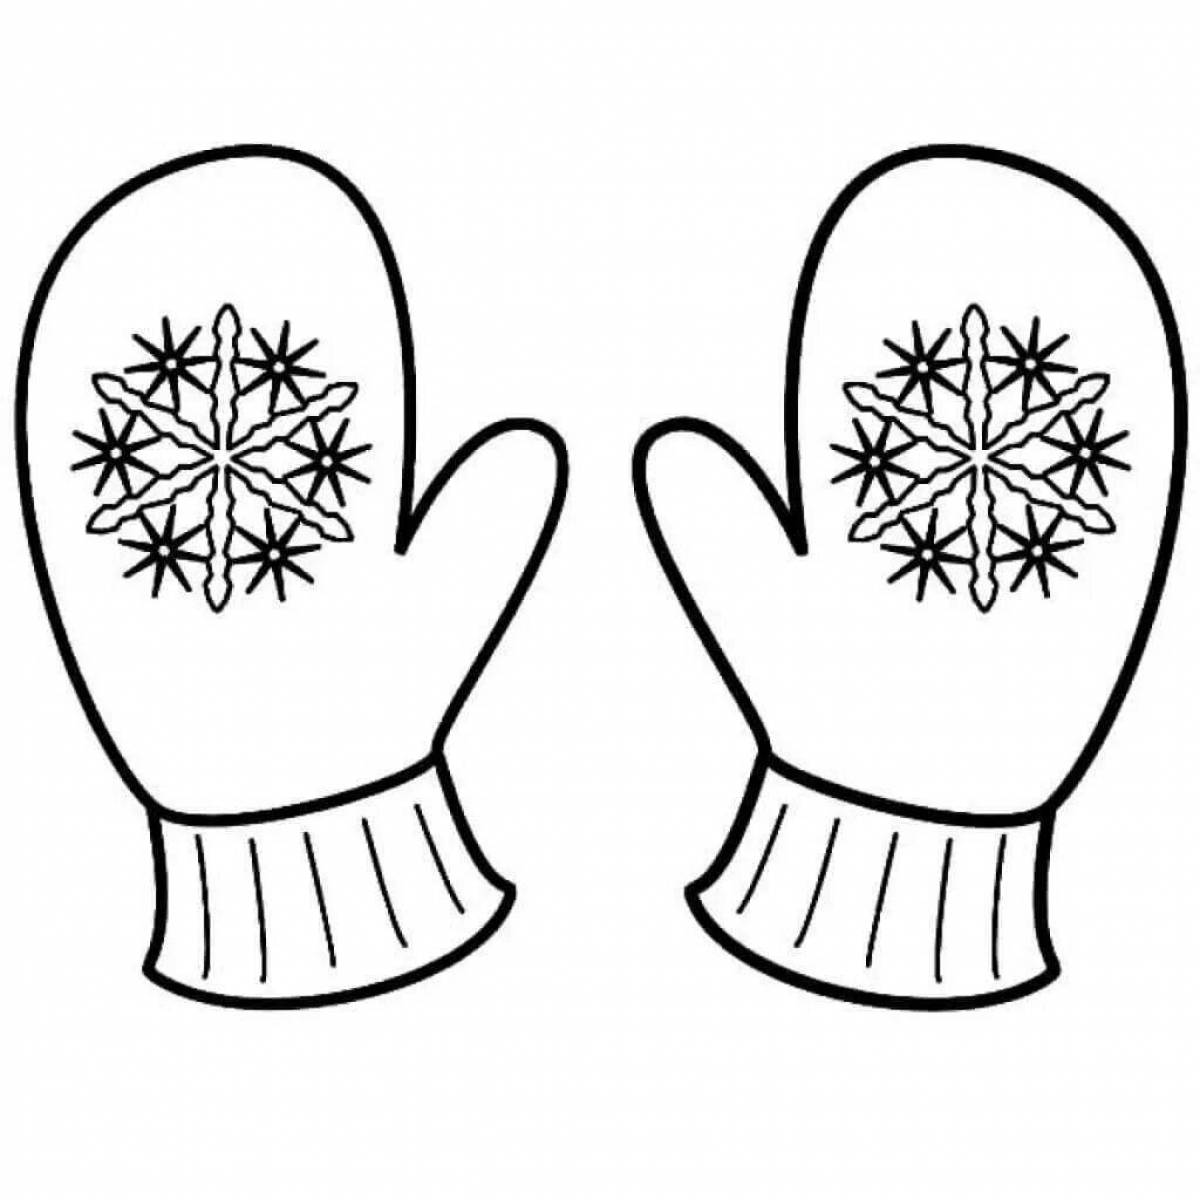 Coloring bright mittens for children